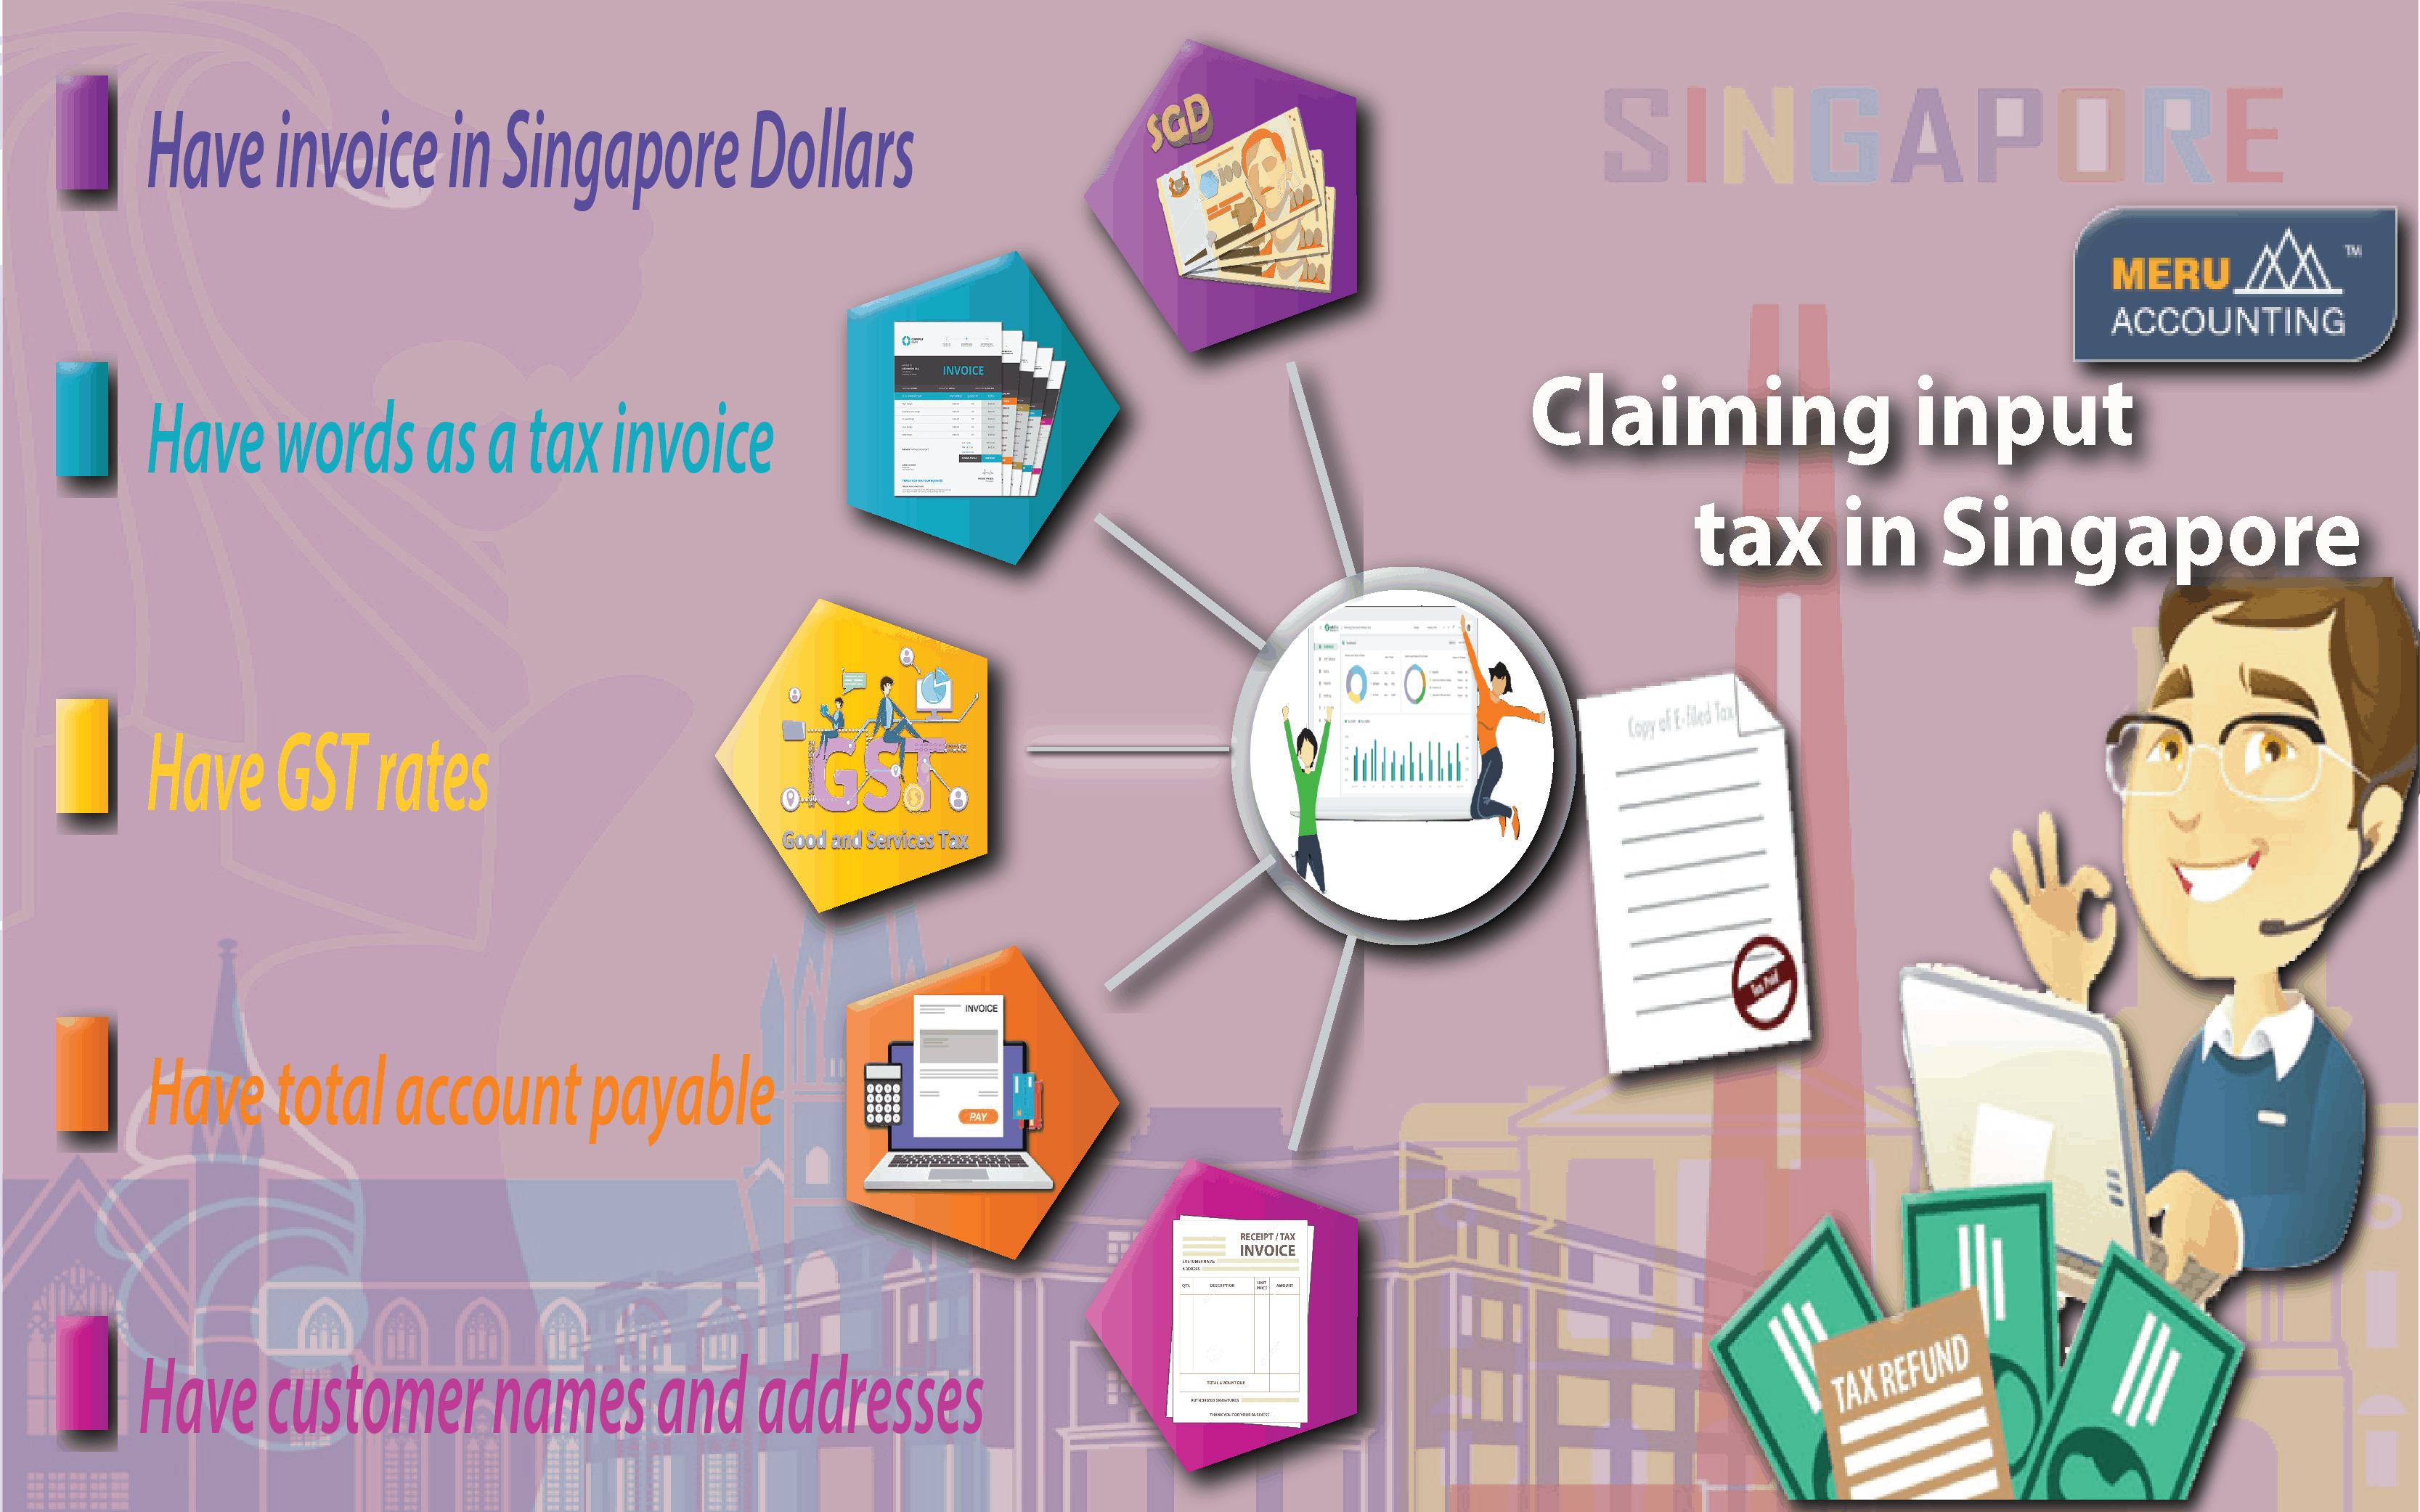 Claiming input tax in Singapore